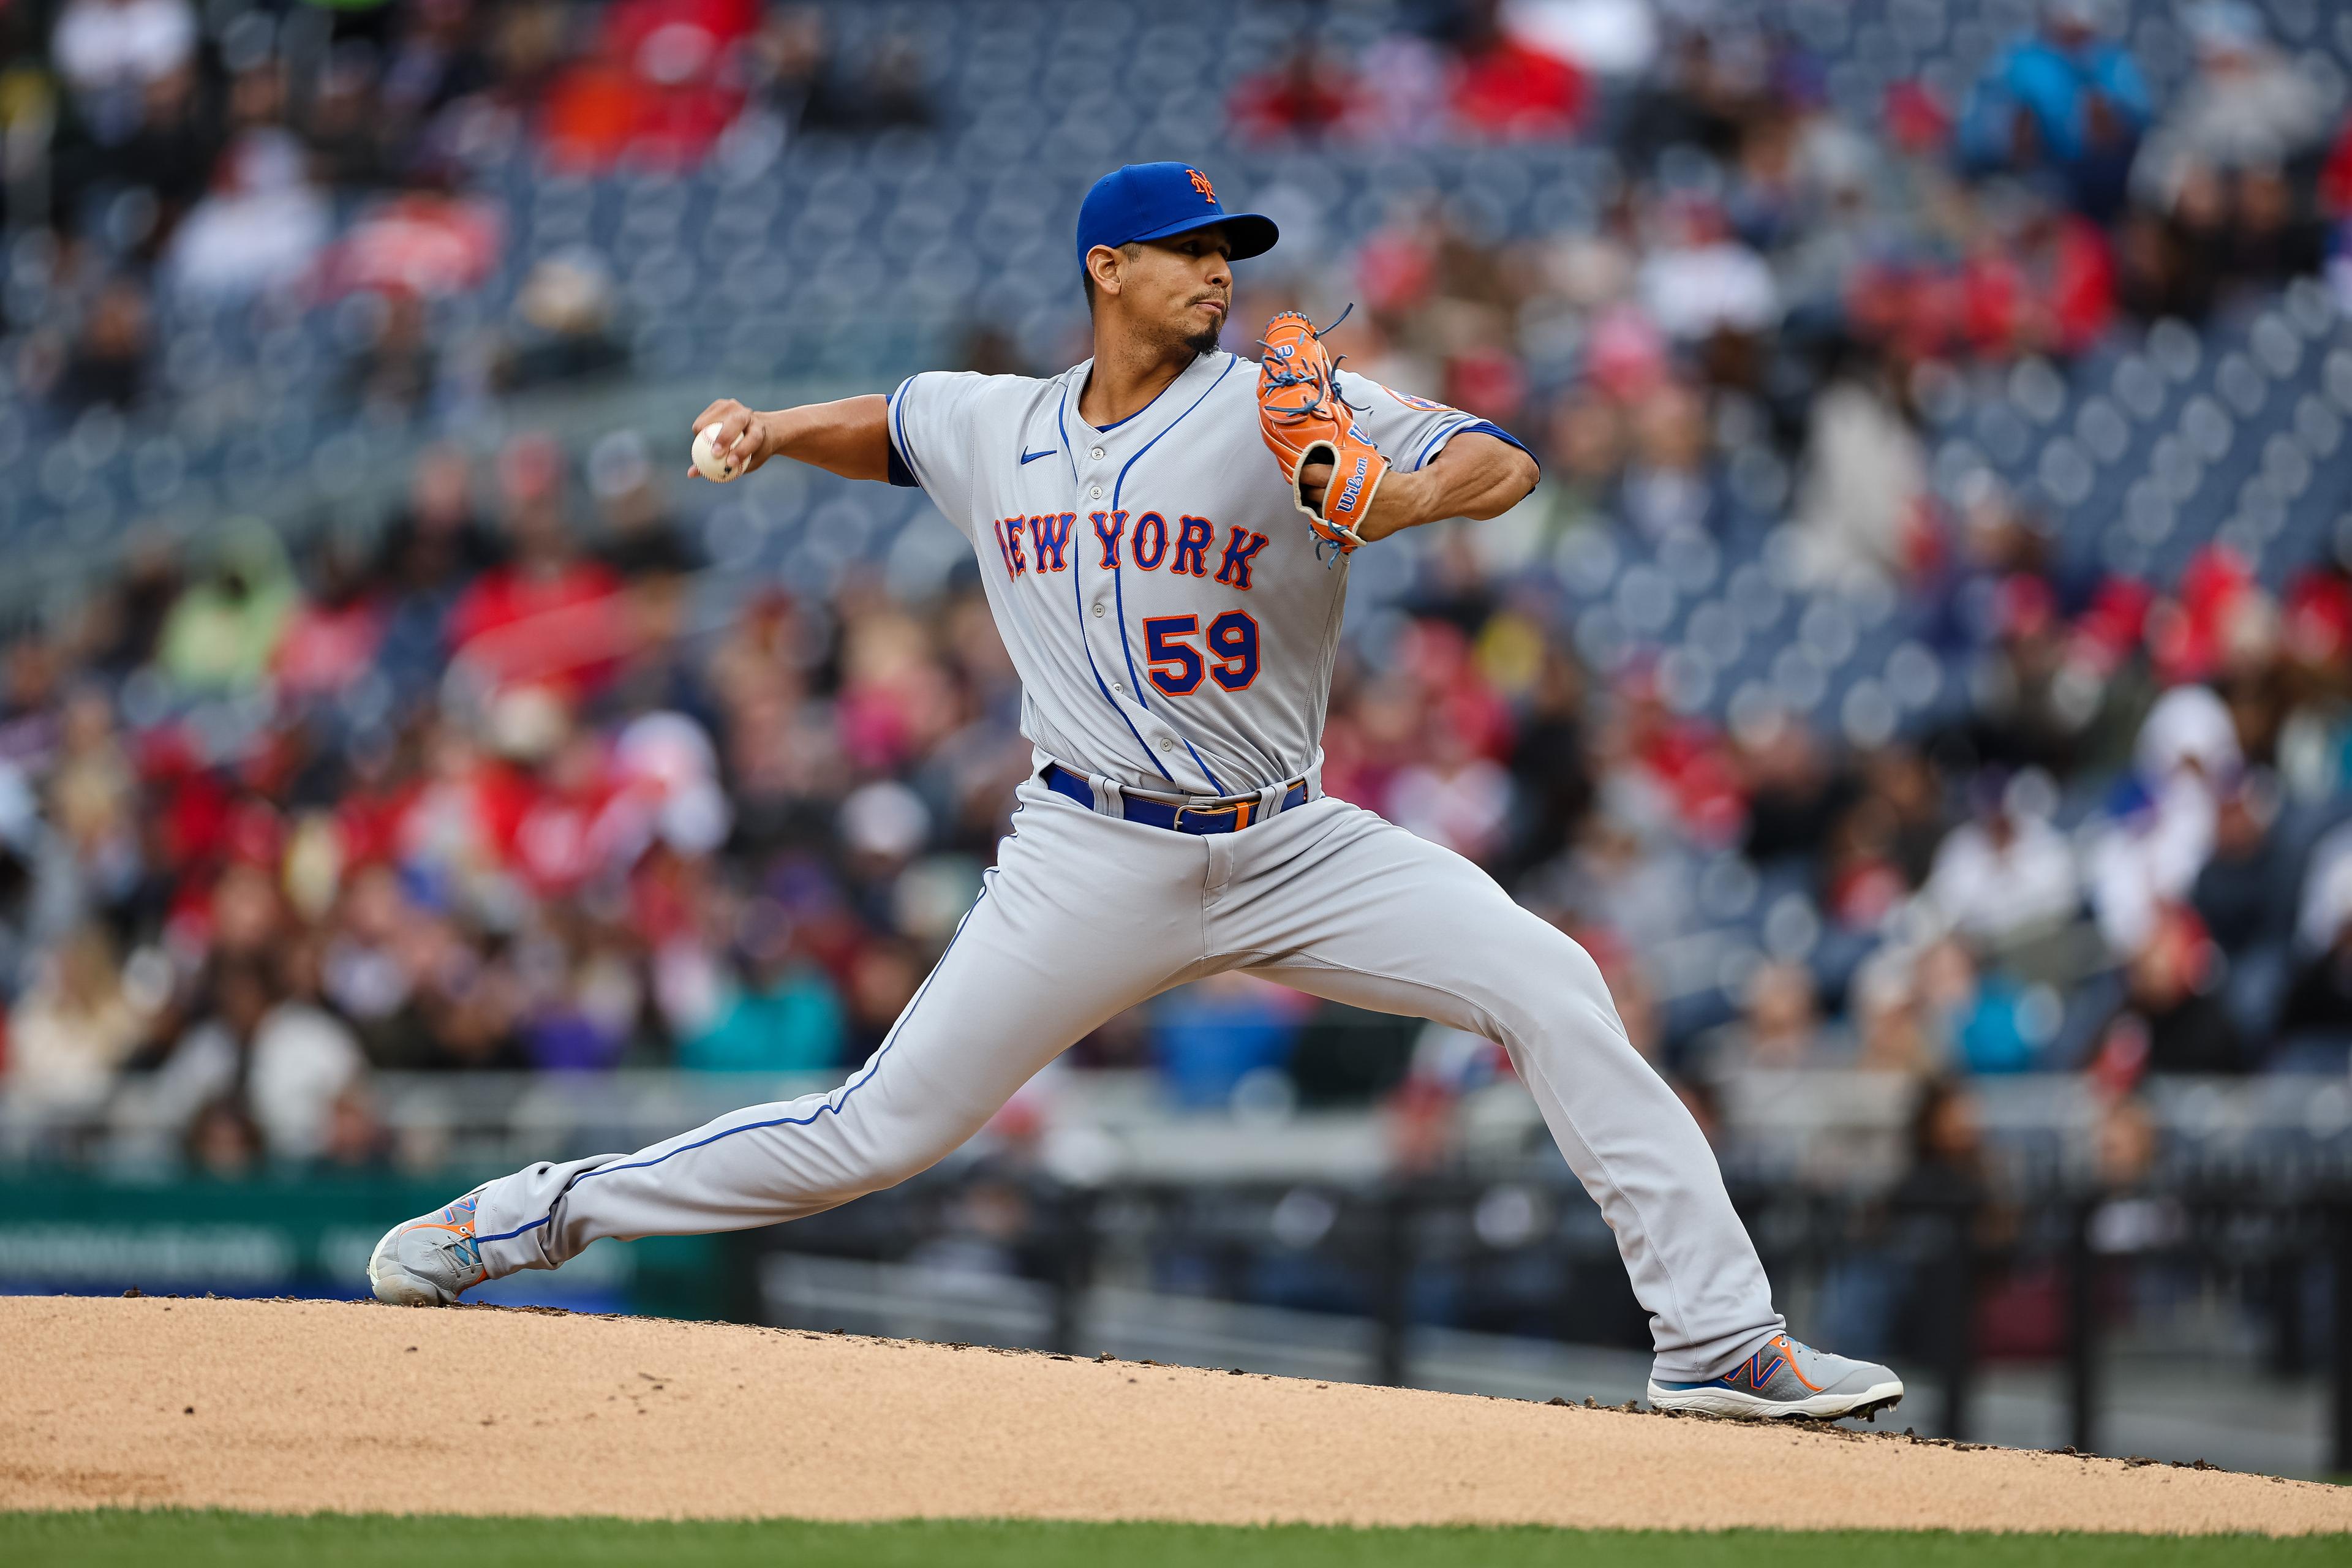 New York Mets starting pitcher Carlos Carrasco (59) pitches against the Washington Nationals during the second inning at Nationals Park. / Scott Taetsch - USA TODAY Sports